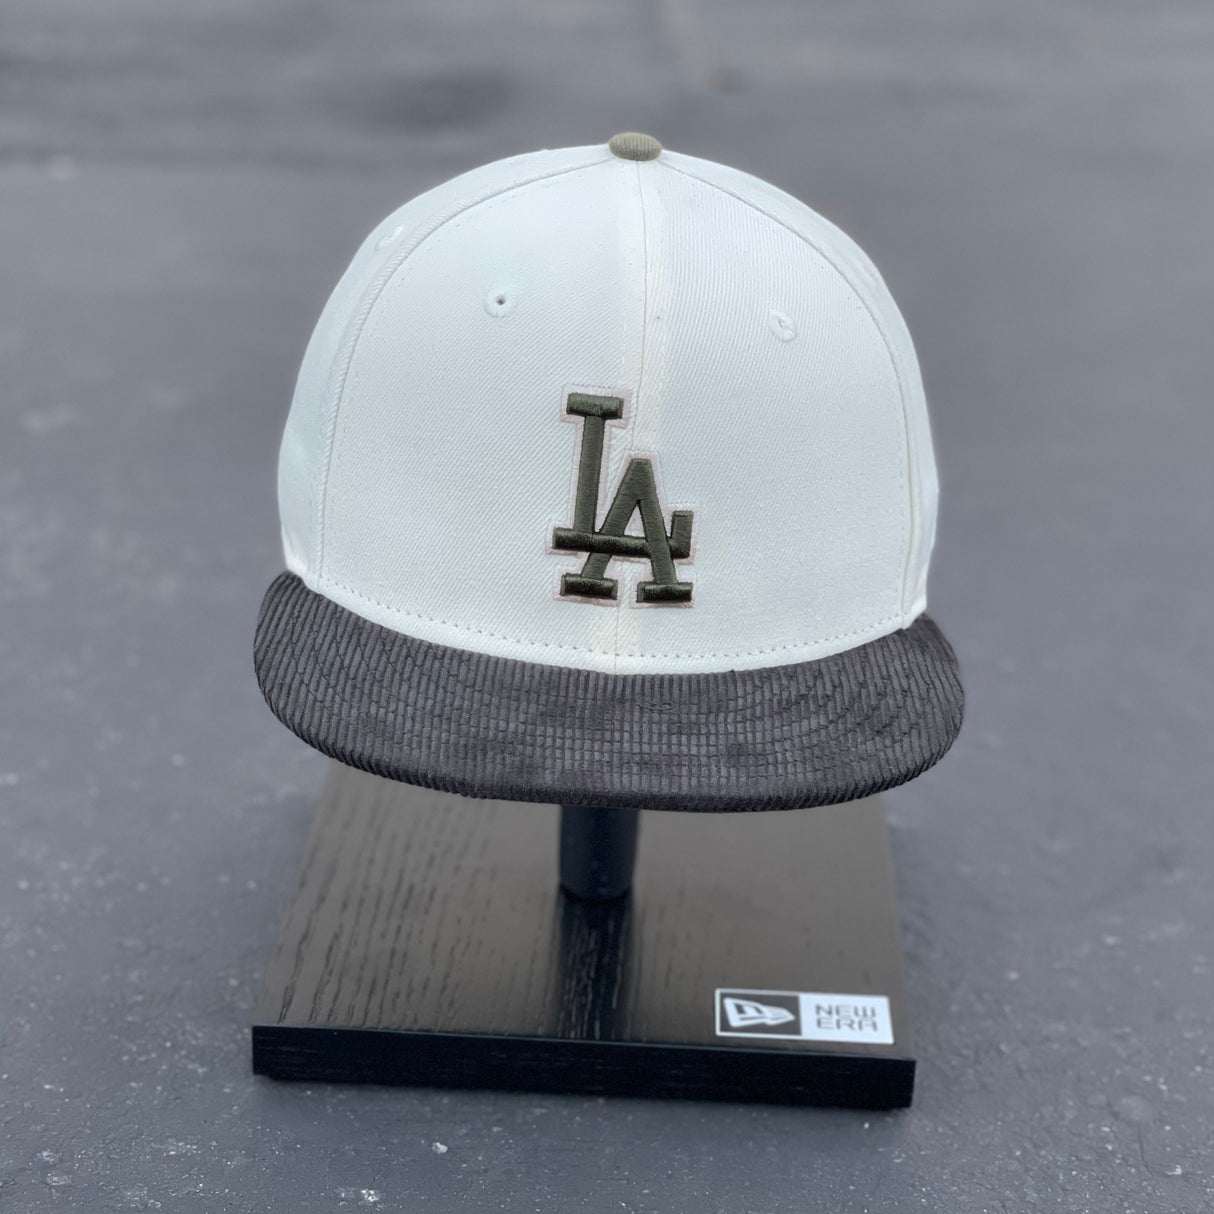 New Era Caps Los Angeles Dodgers 59FIFTY Fitted Hat Olive